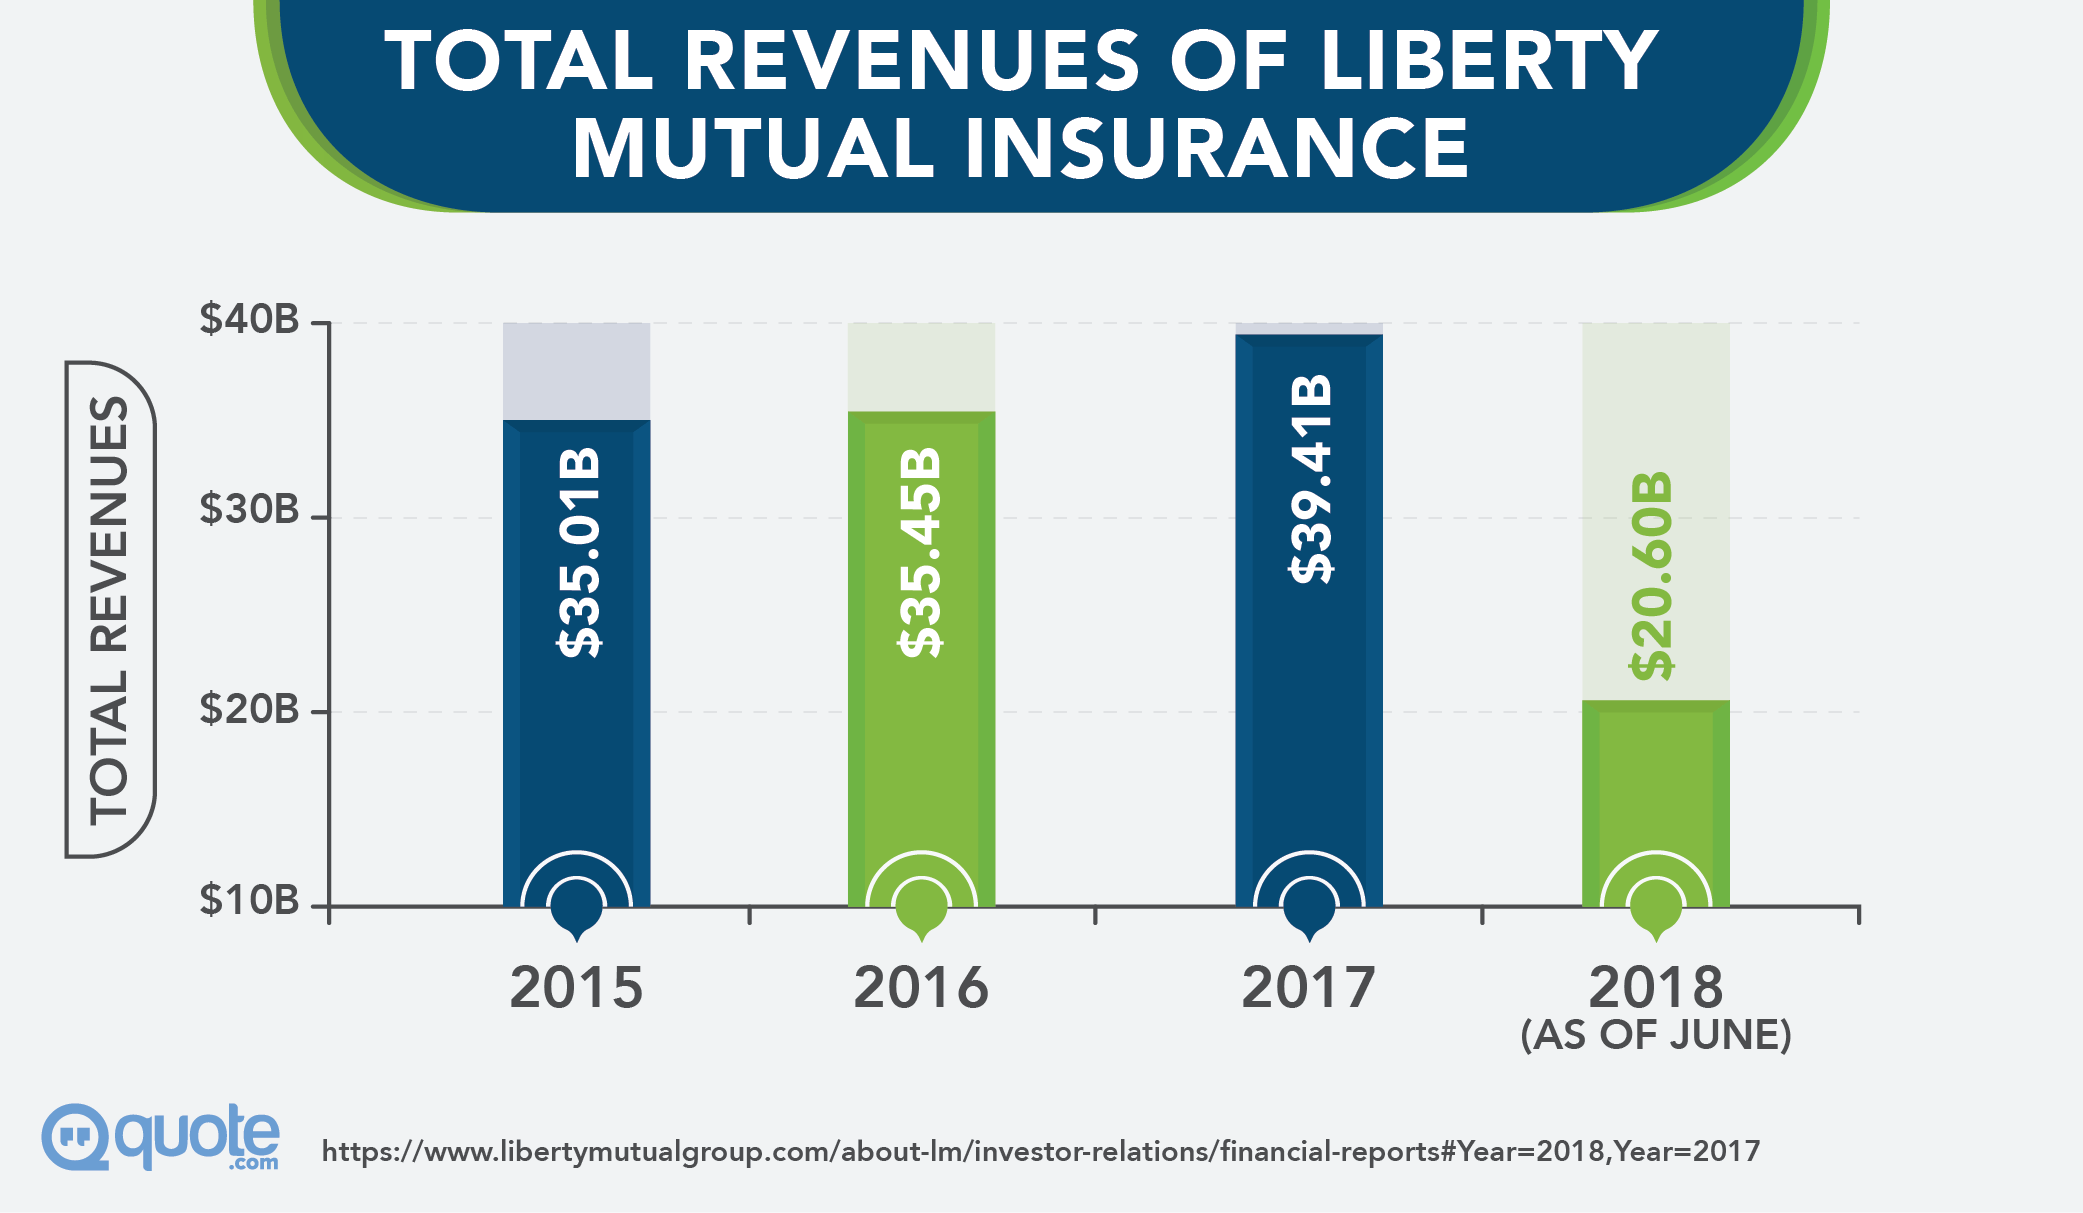 Total Revenues of Liberty Mutual Insurance from 2015-2018